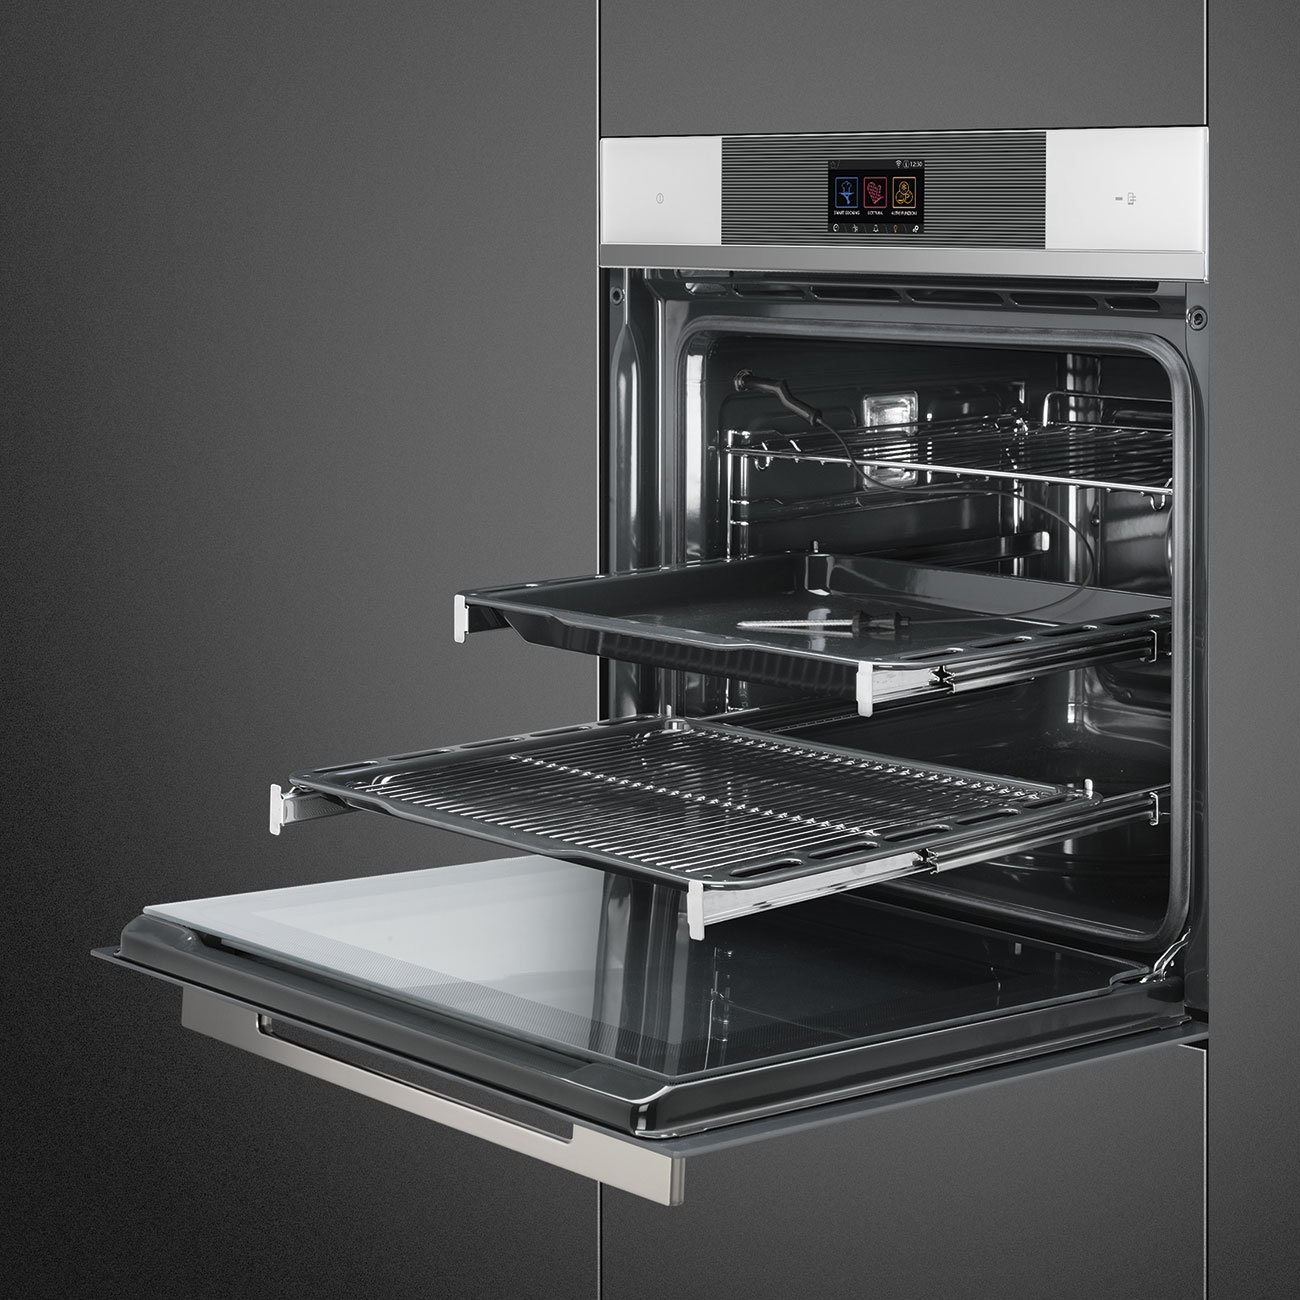 Thermo-ventilated Oven 60cm Smeg_2